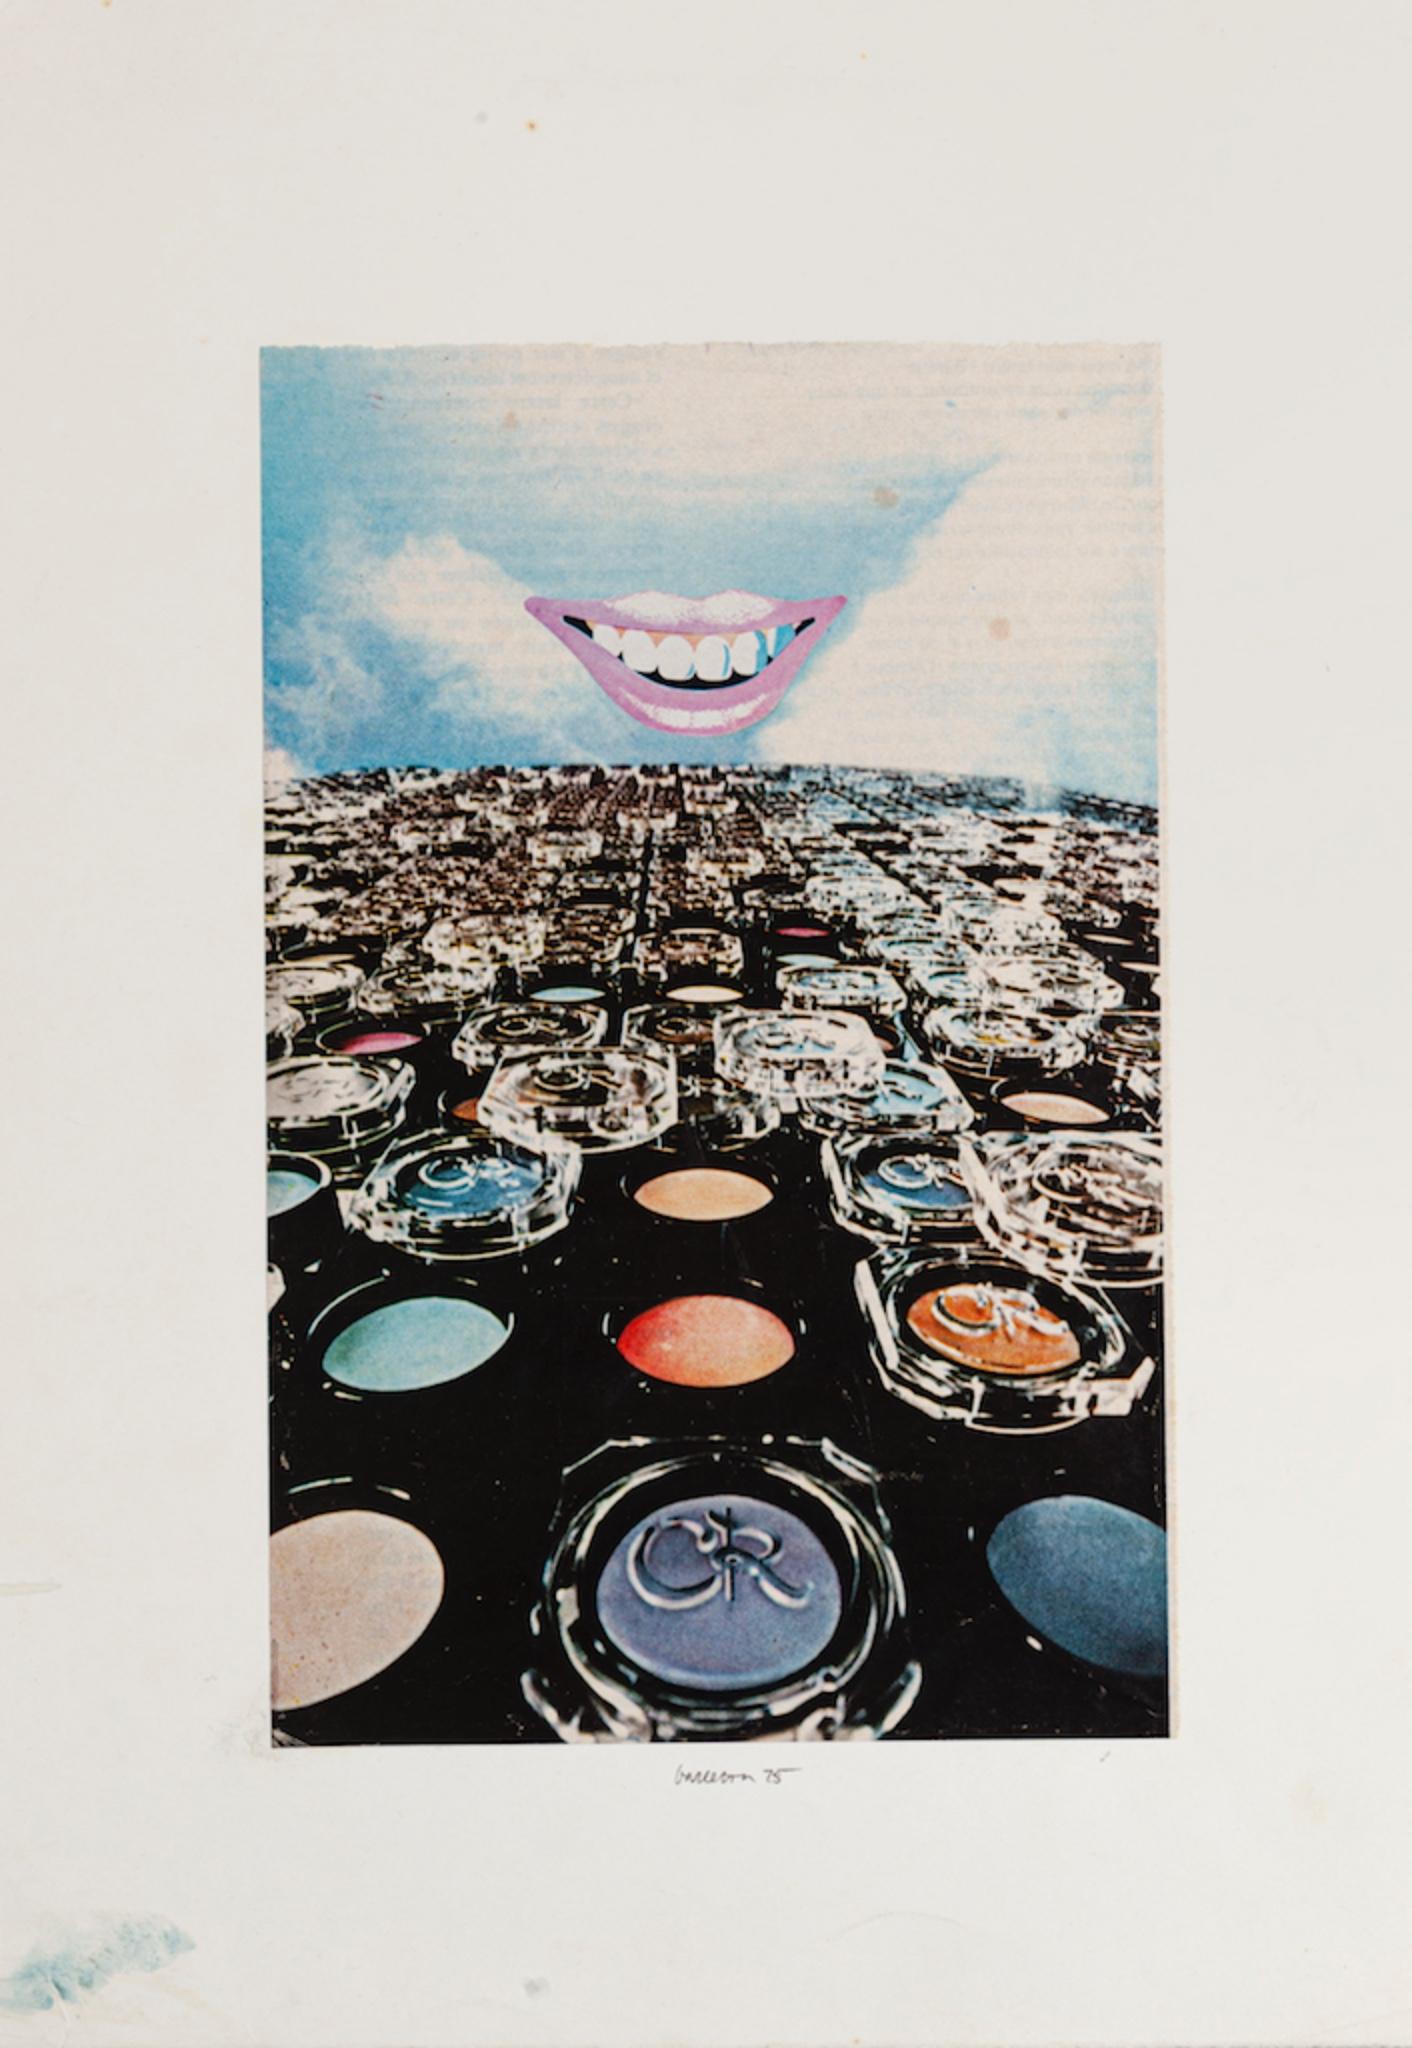 Laughter is an original collage artwork applied on the cardboard realized by Sergio Barletta in 1975. Hand-signed on the lower center and dated.

The state of preservation is very good with small bluish color on the lower left. Image Dimensions: 24